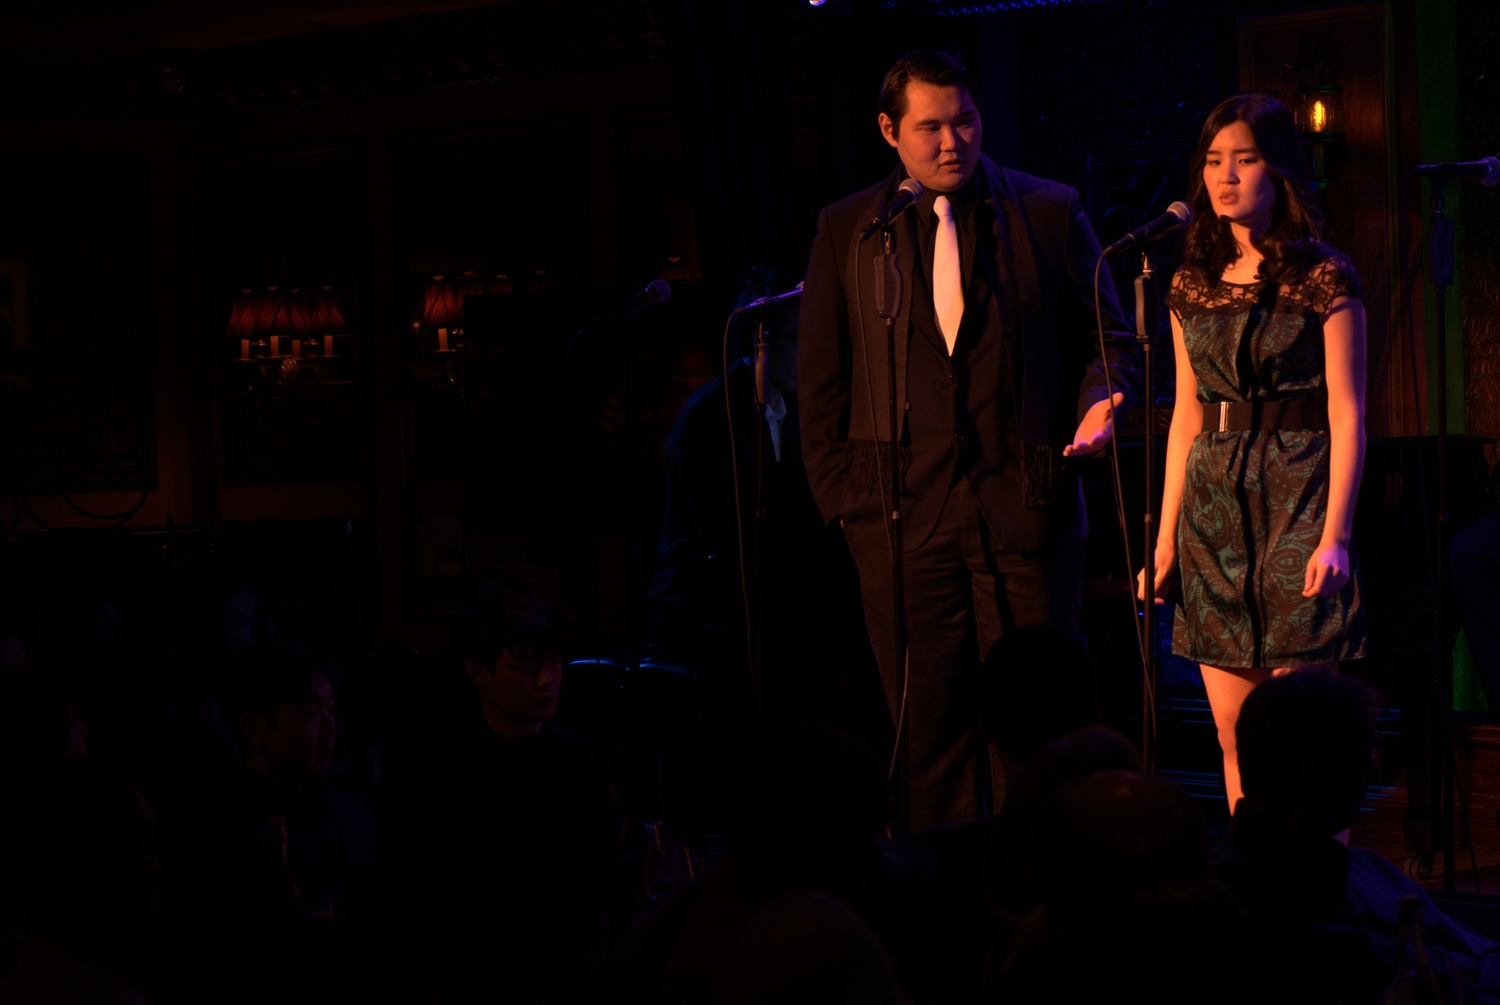 Some of the pictures from 54 Below concert. 4